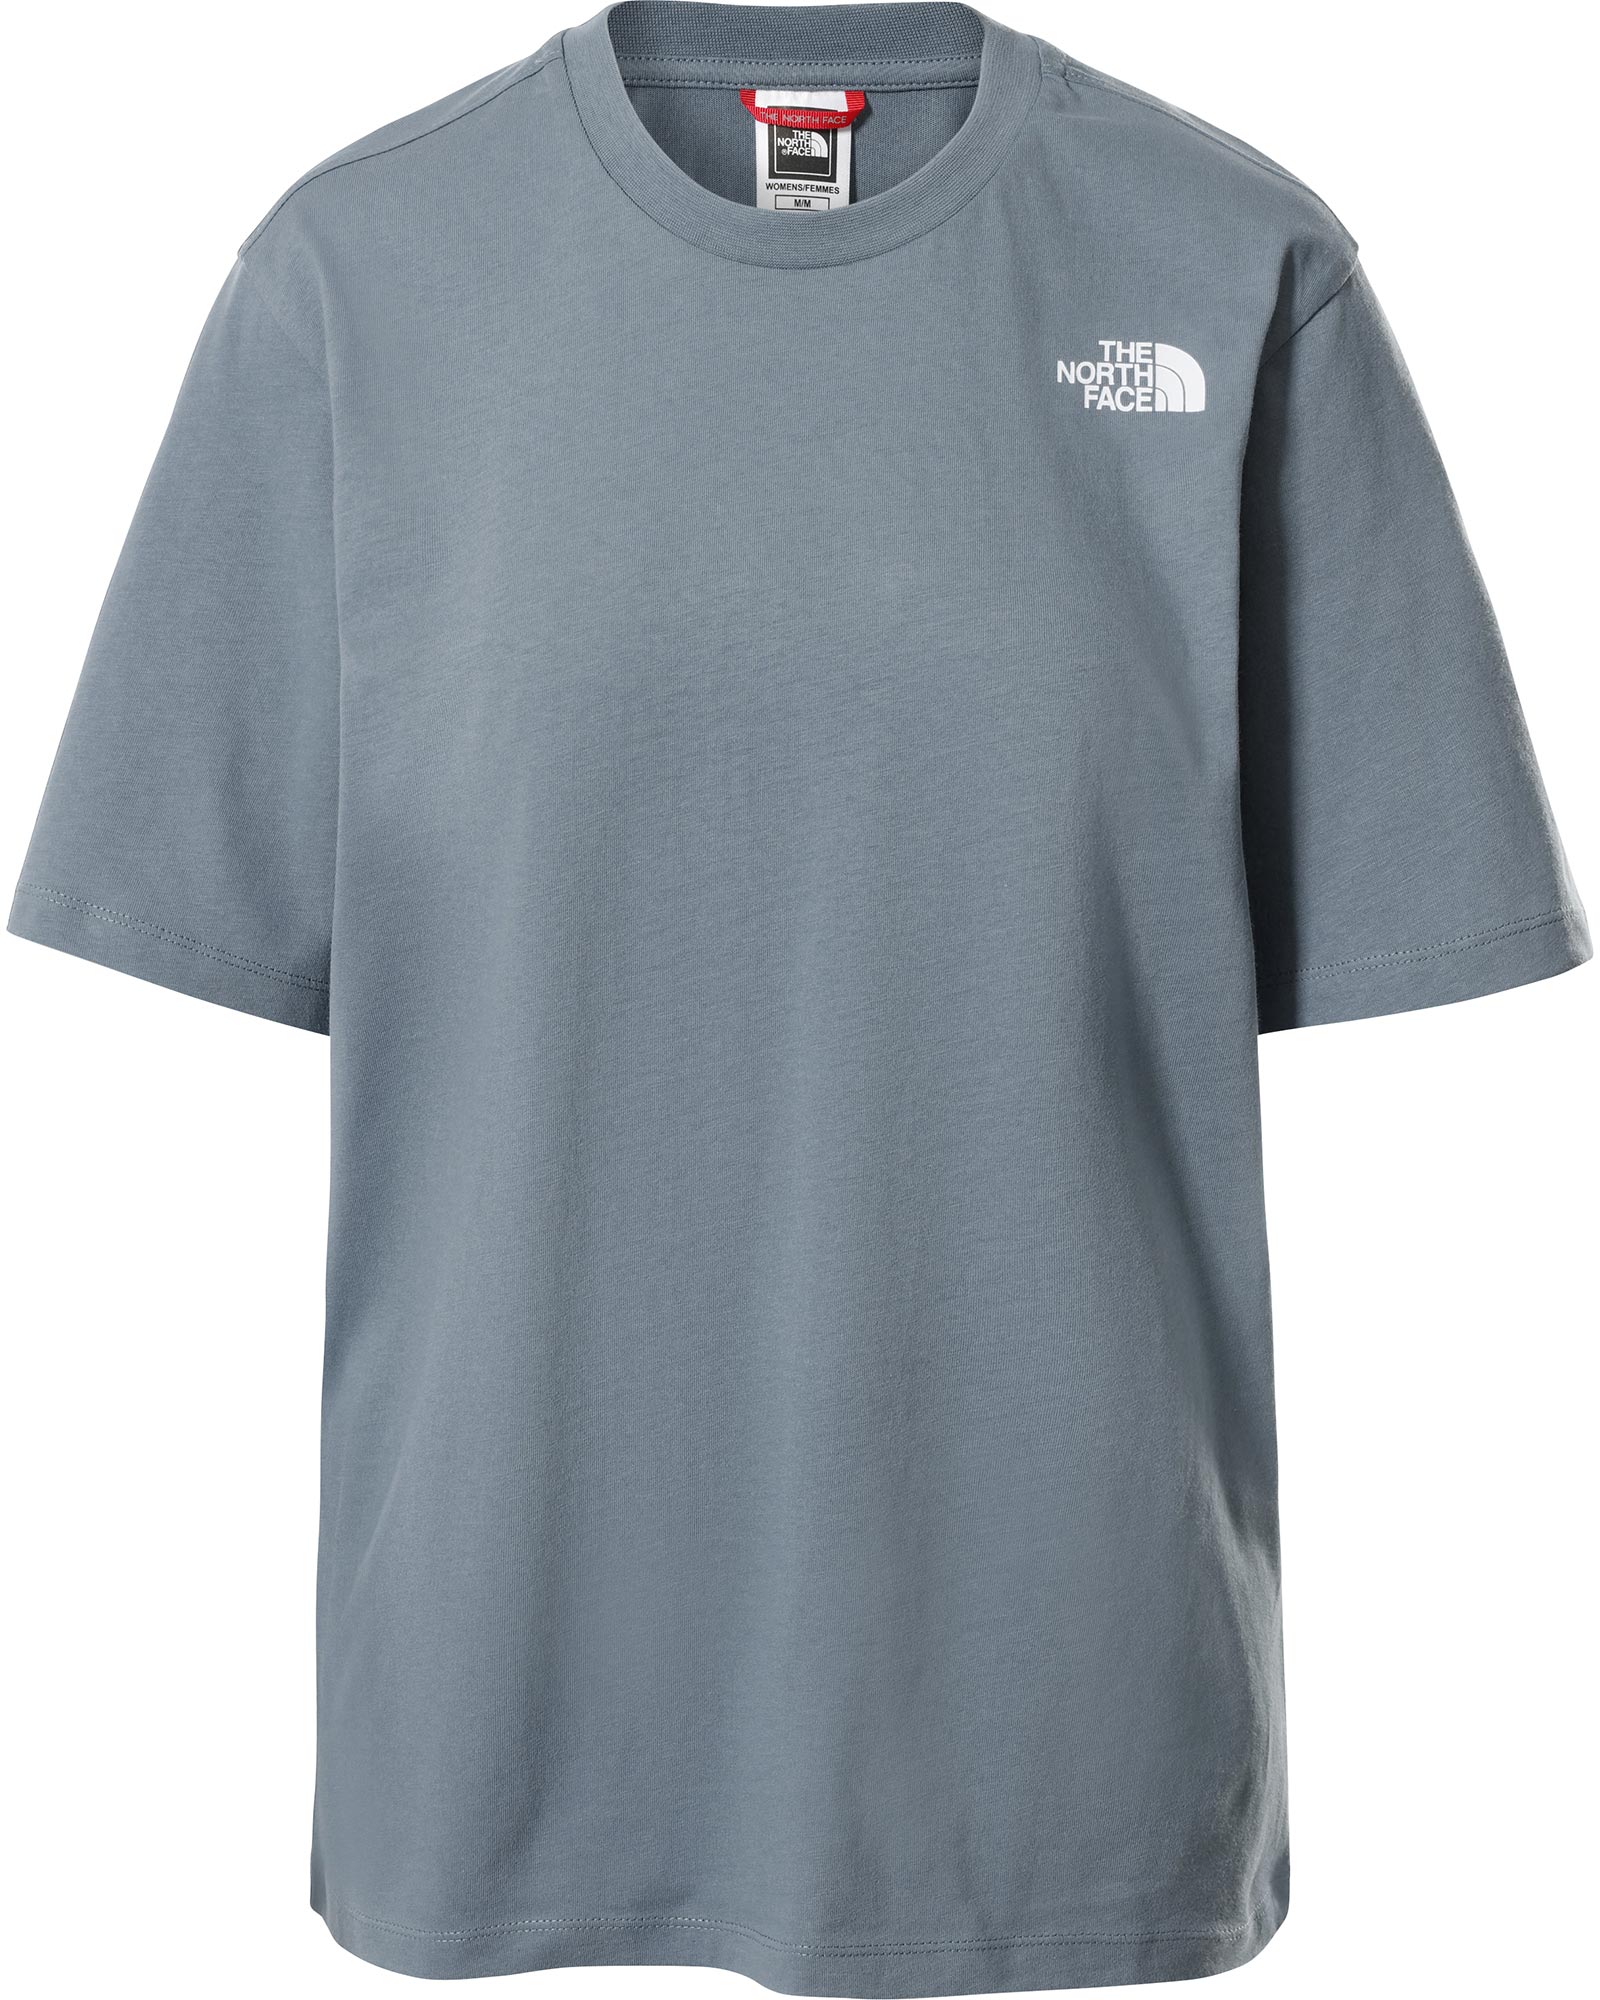 Product image of The North Face Relaxed Redbox Women's T-Shirt